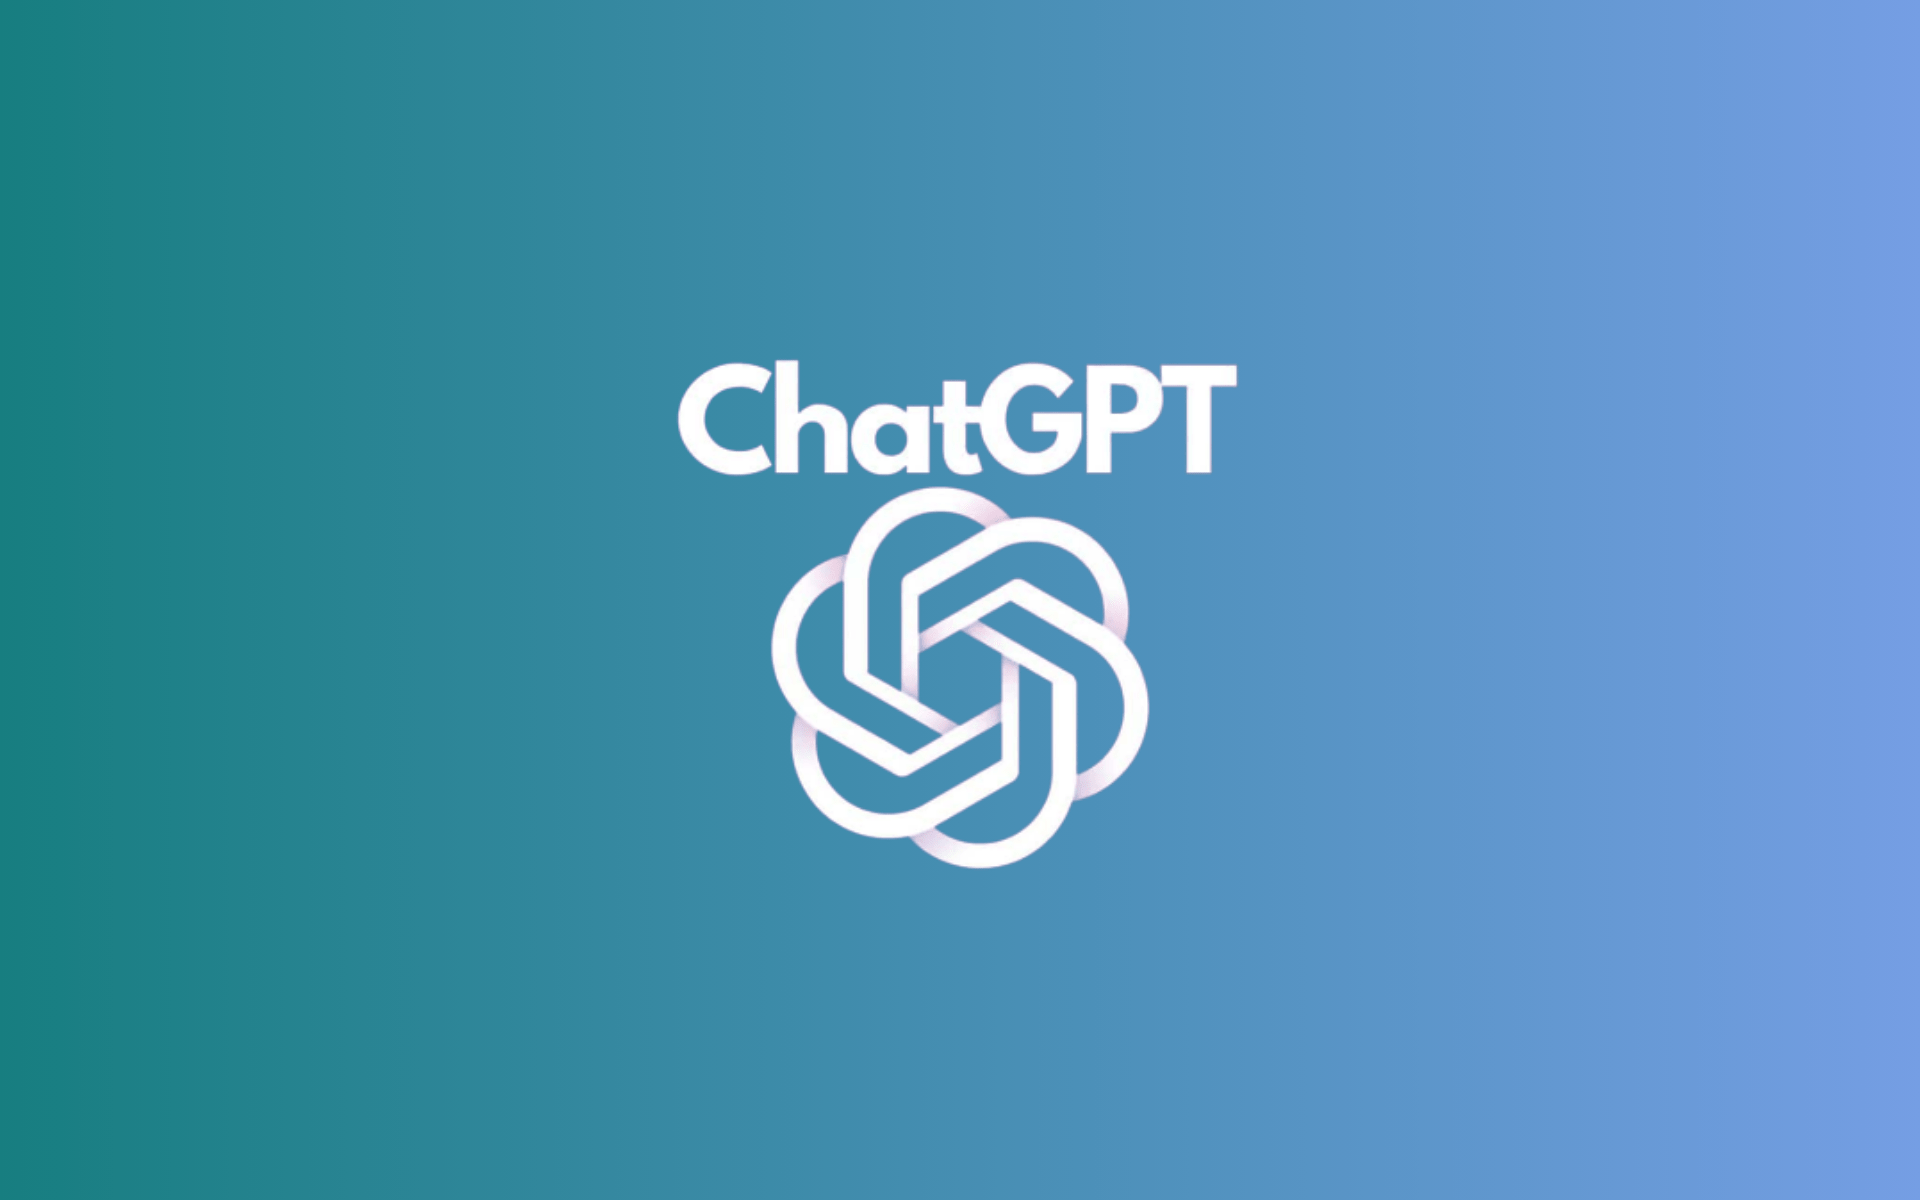 Is ChatGPT the best AI?